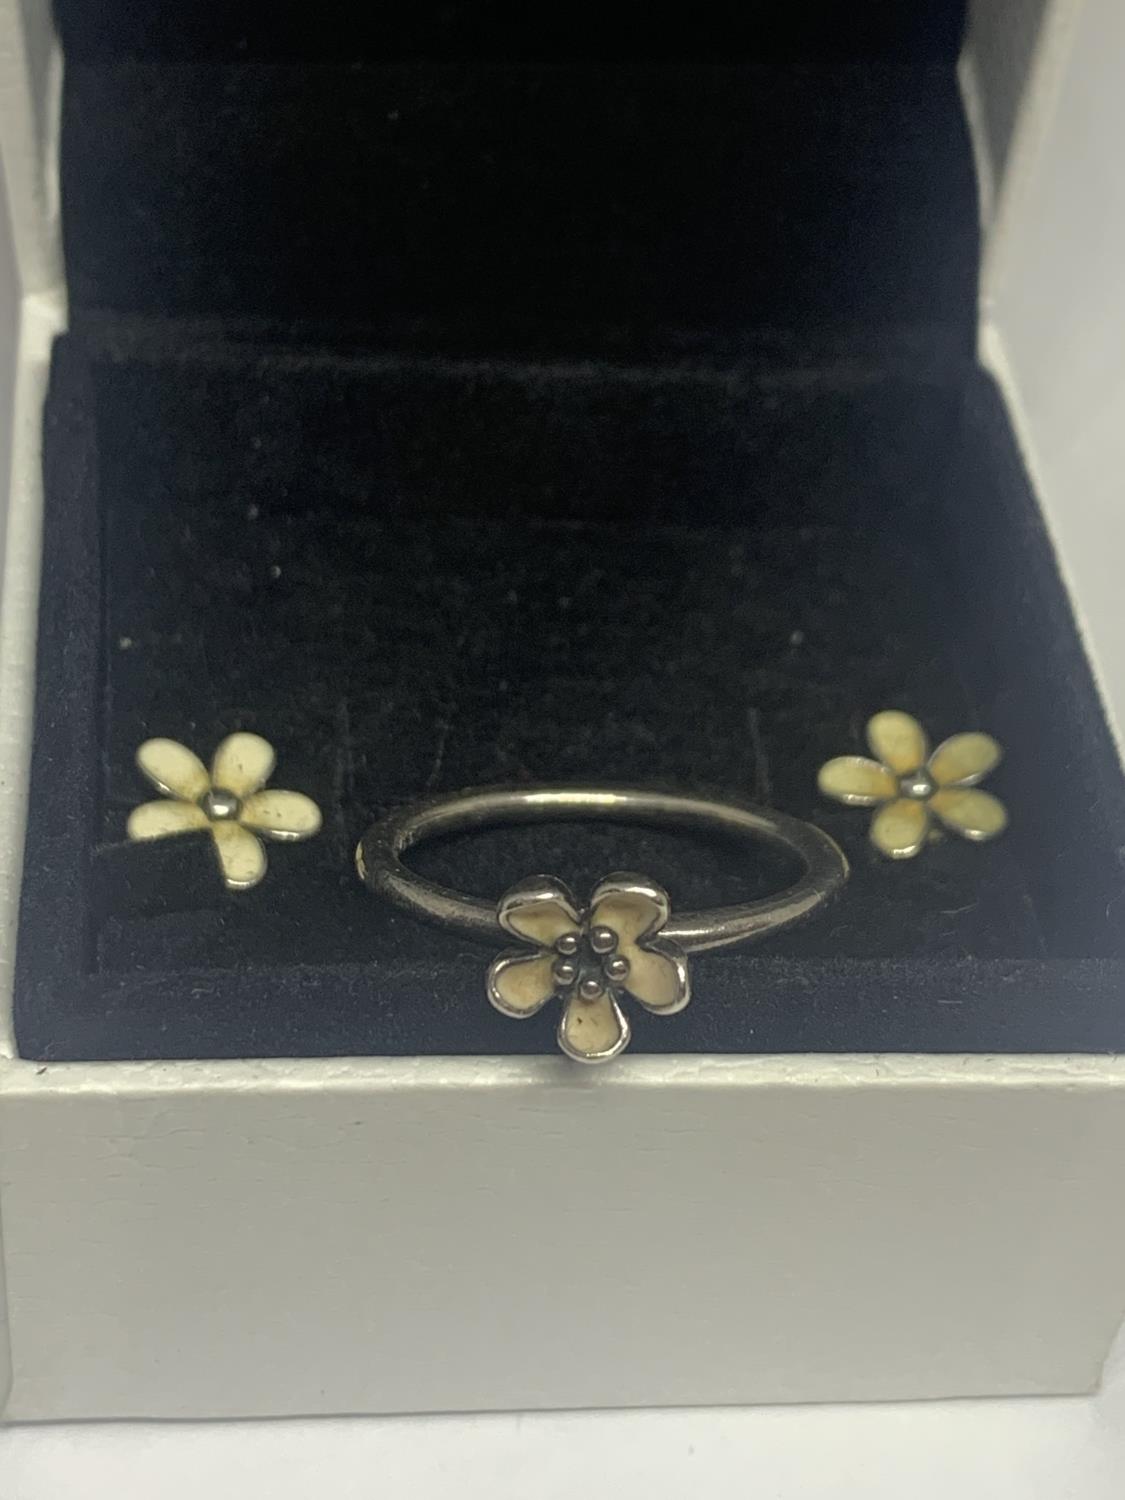 A PANDORA FLOWER RING SIZE N AND A PAIR OF MATCHING EARRINGS IN A PRESENTATION BOX - Image 2 of 3